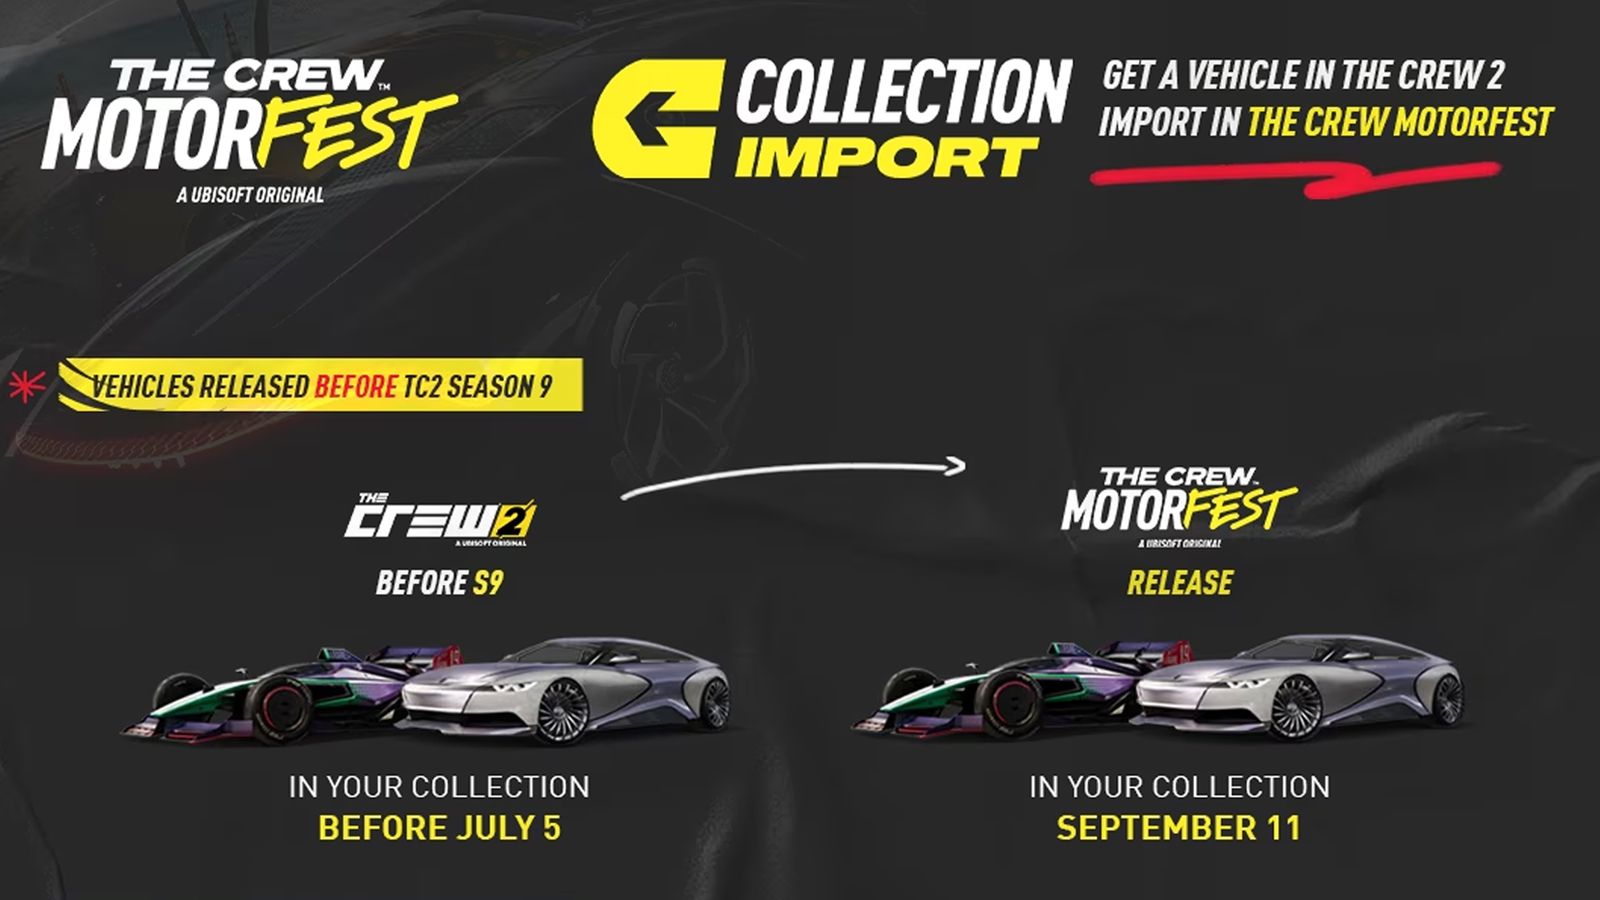 The Crew Motorfest collection import